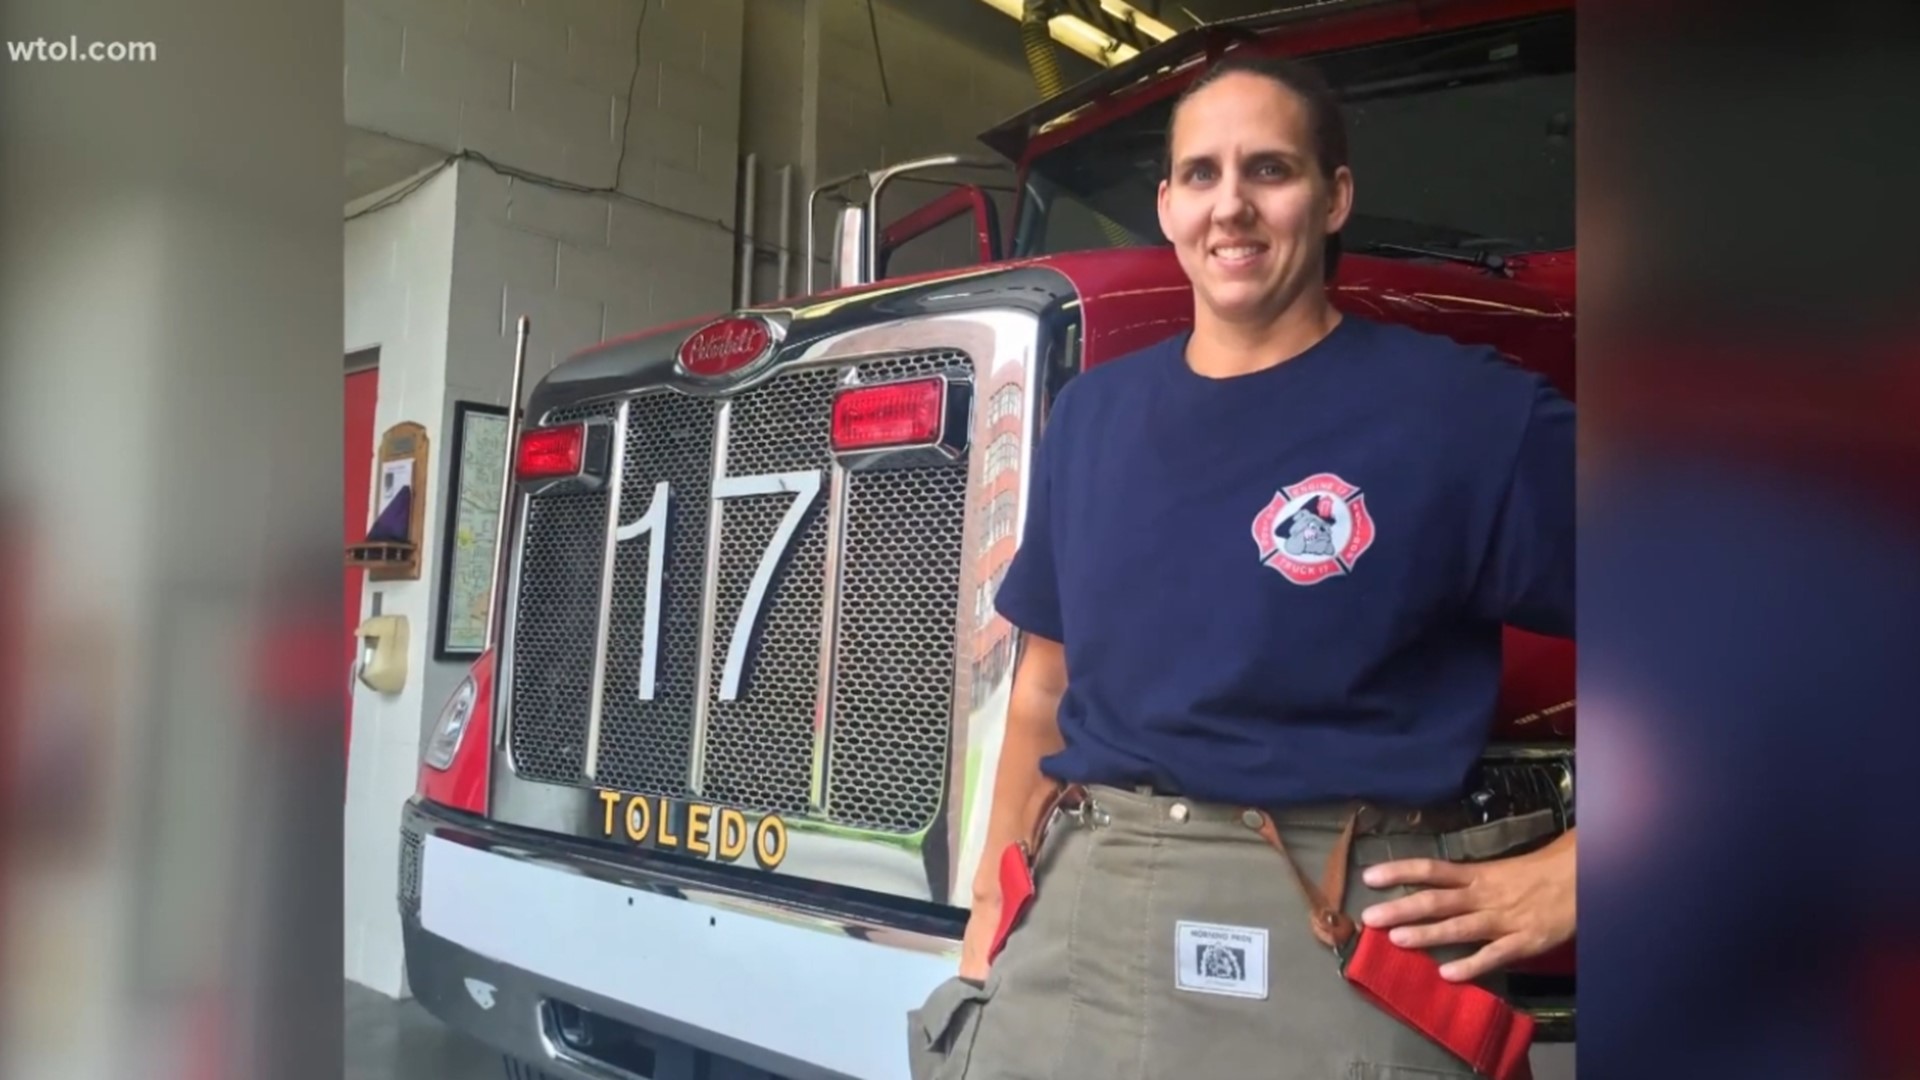 WTOL 11 spoke to well-known Toledoans and organizations about the significance of Allison Armstrong's promotion to lead the Toledo Fire & Rescue Department.